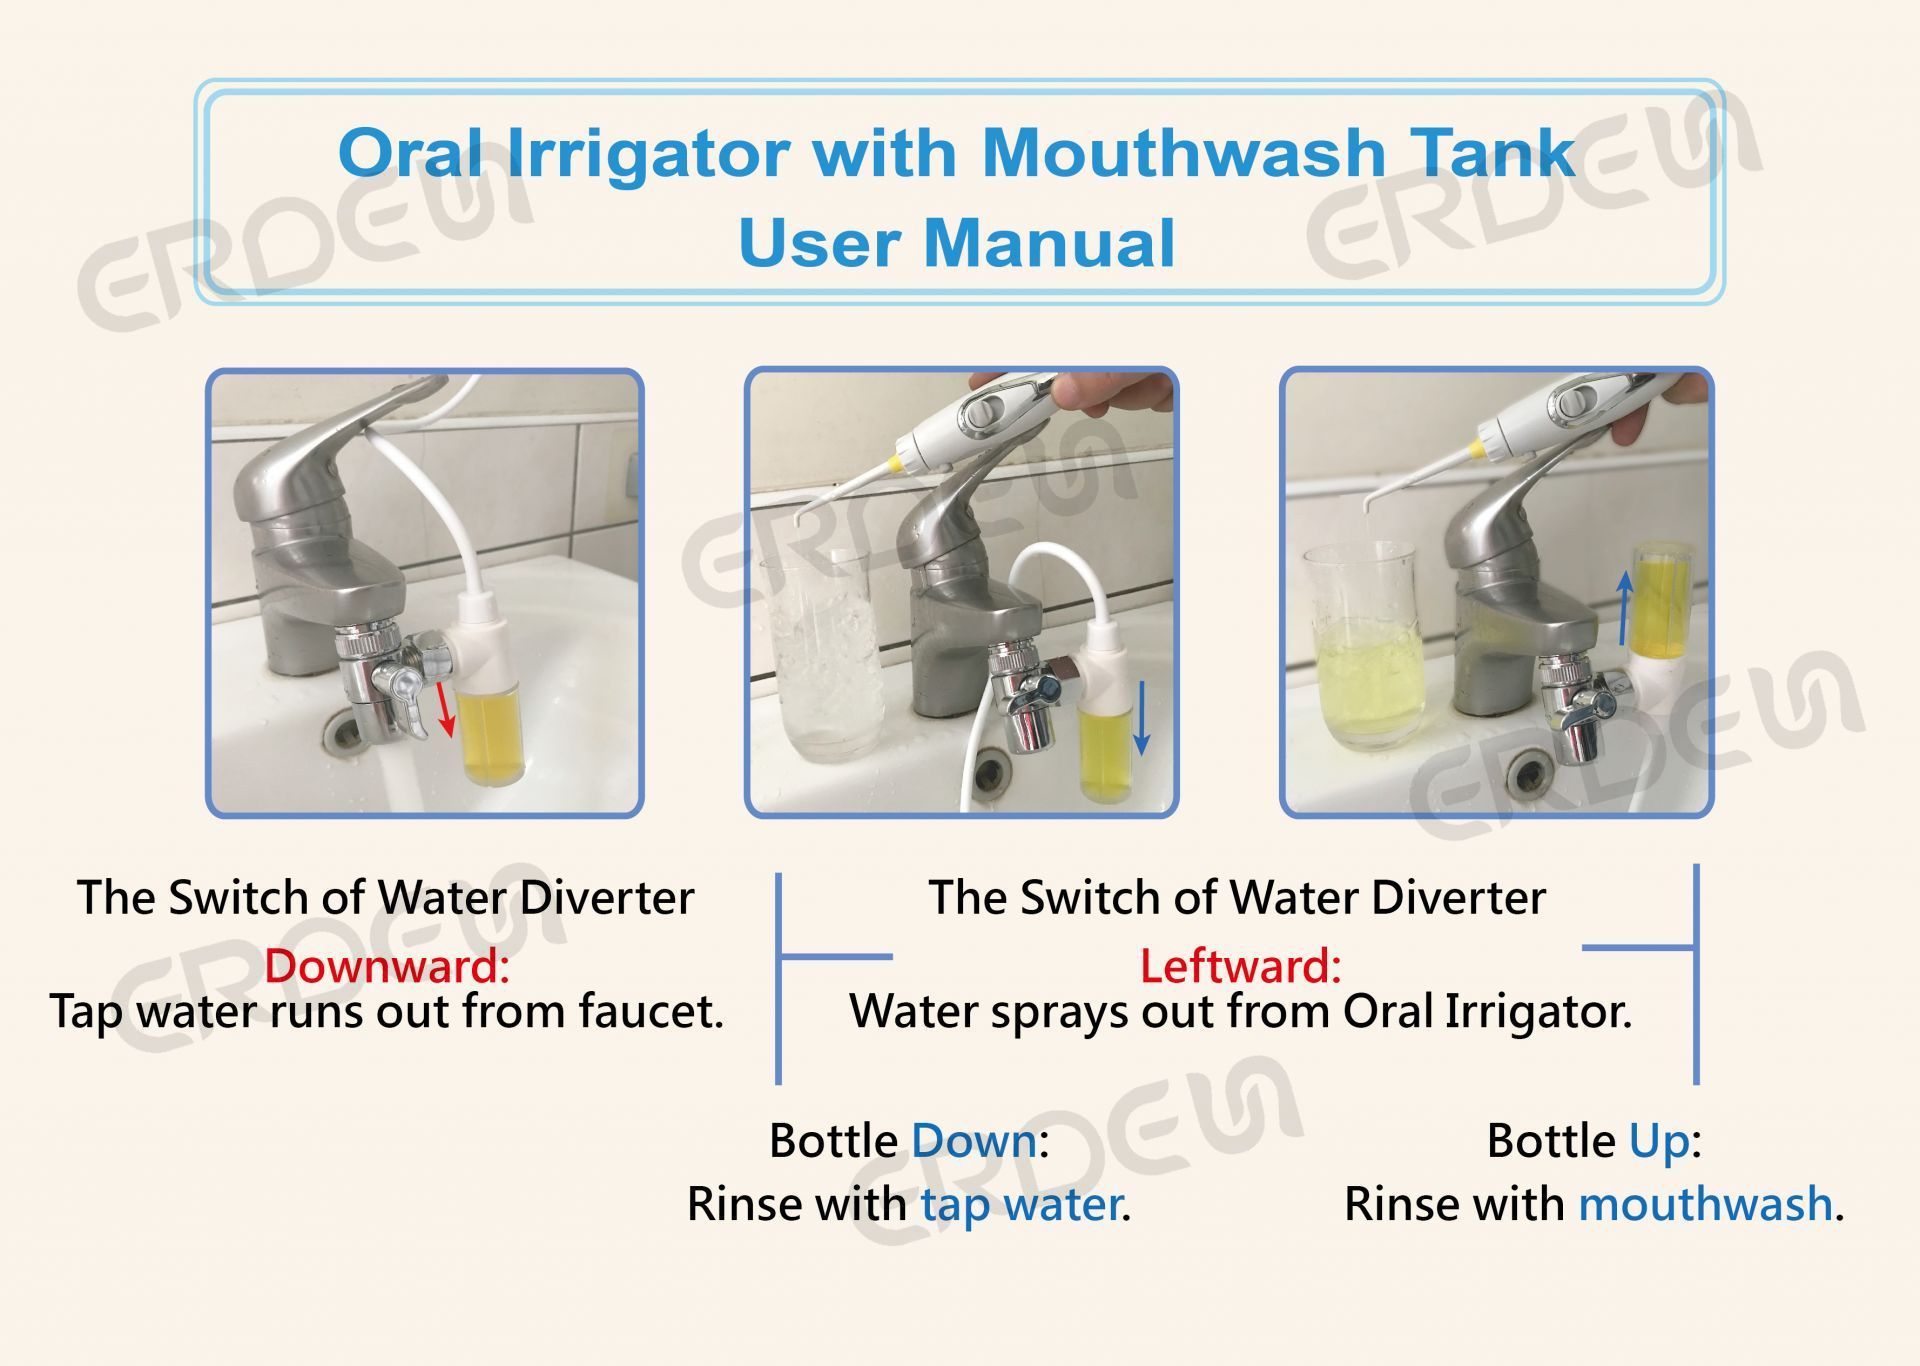 Application of Oral Irrigator with Mouthwash